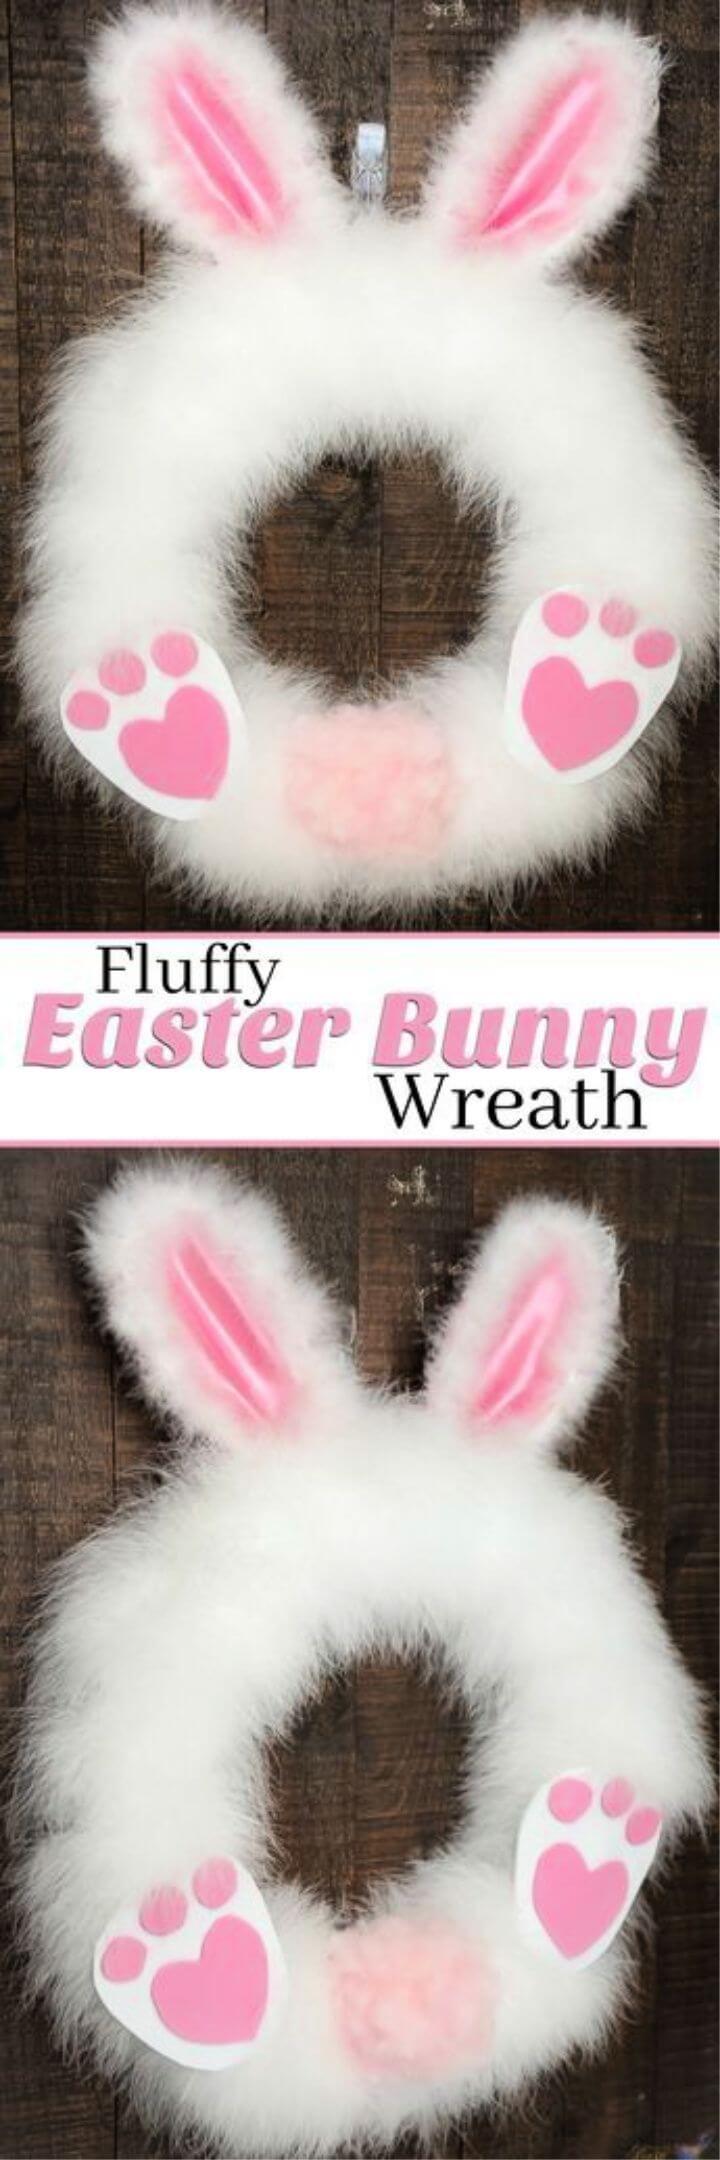 DIY Fluffy Easter Bunny Wreath in under 30 minutes